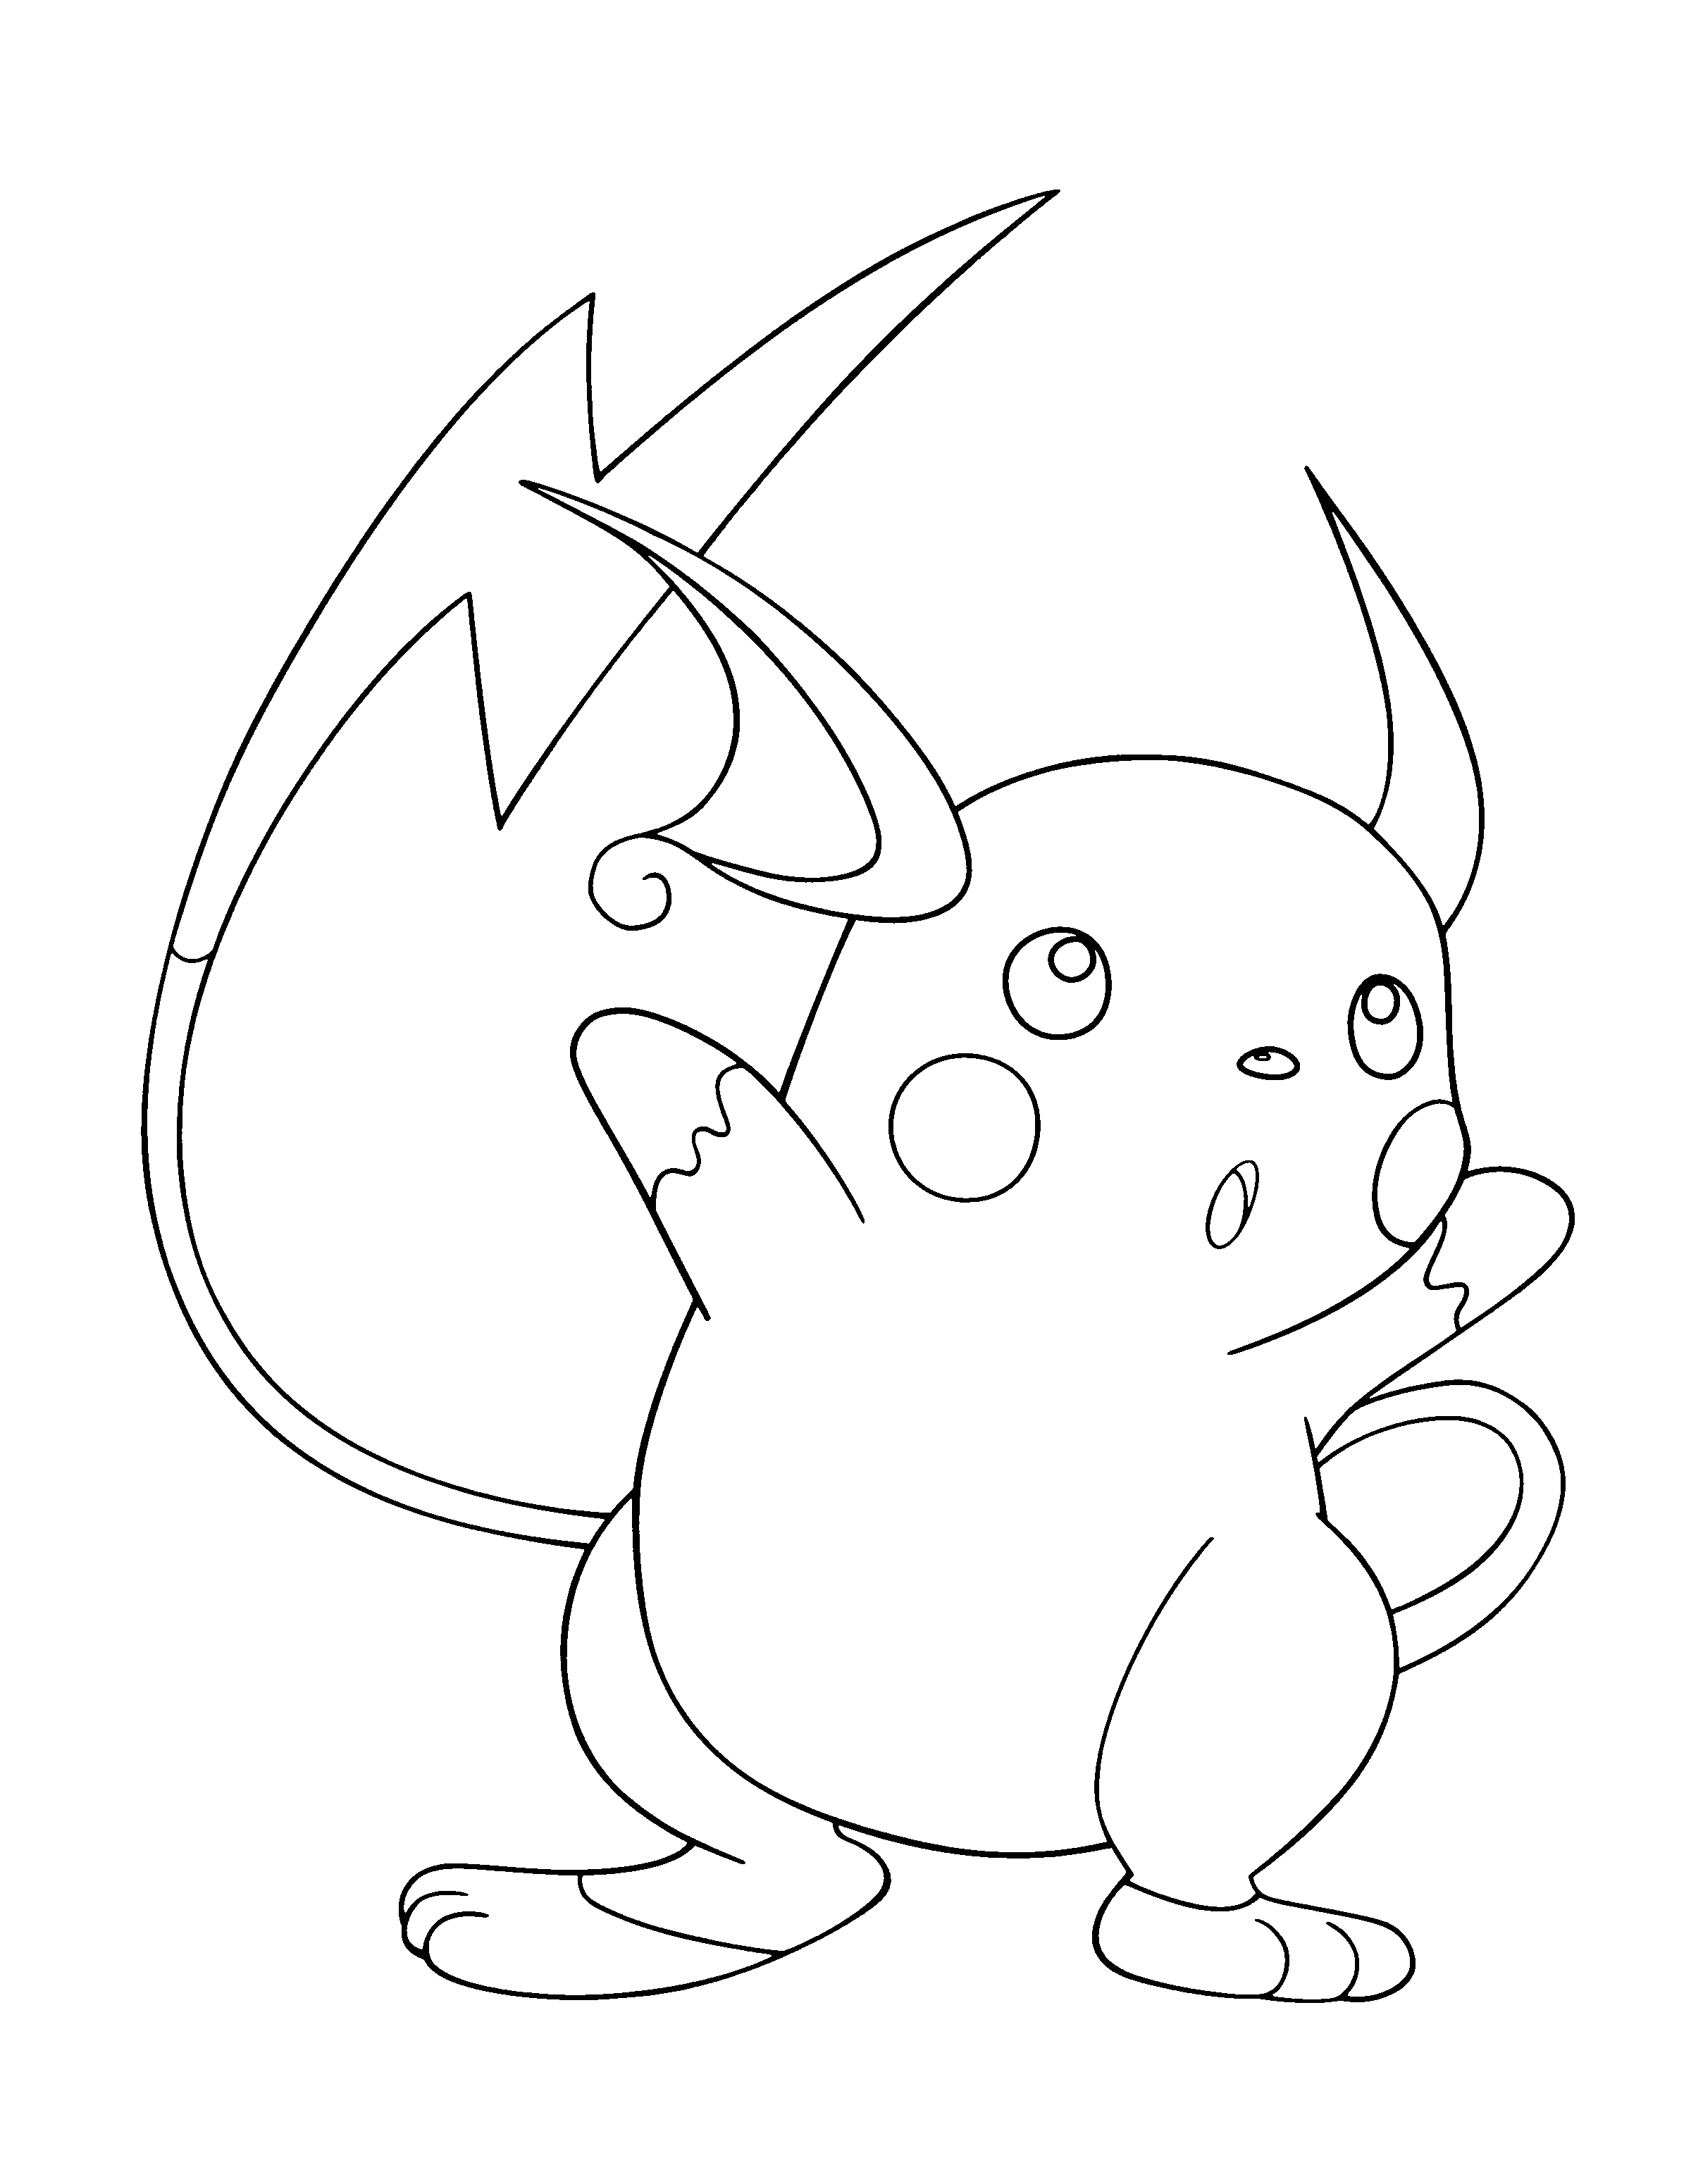 Coloring Page Pokemon Advanced Coloring Pages 52 Pikachu Coloring Page Pokemon Colori